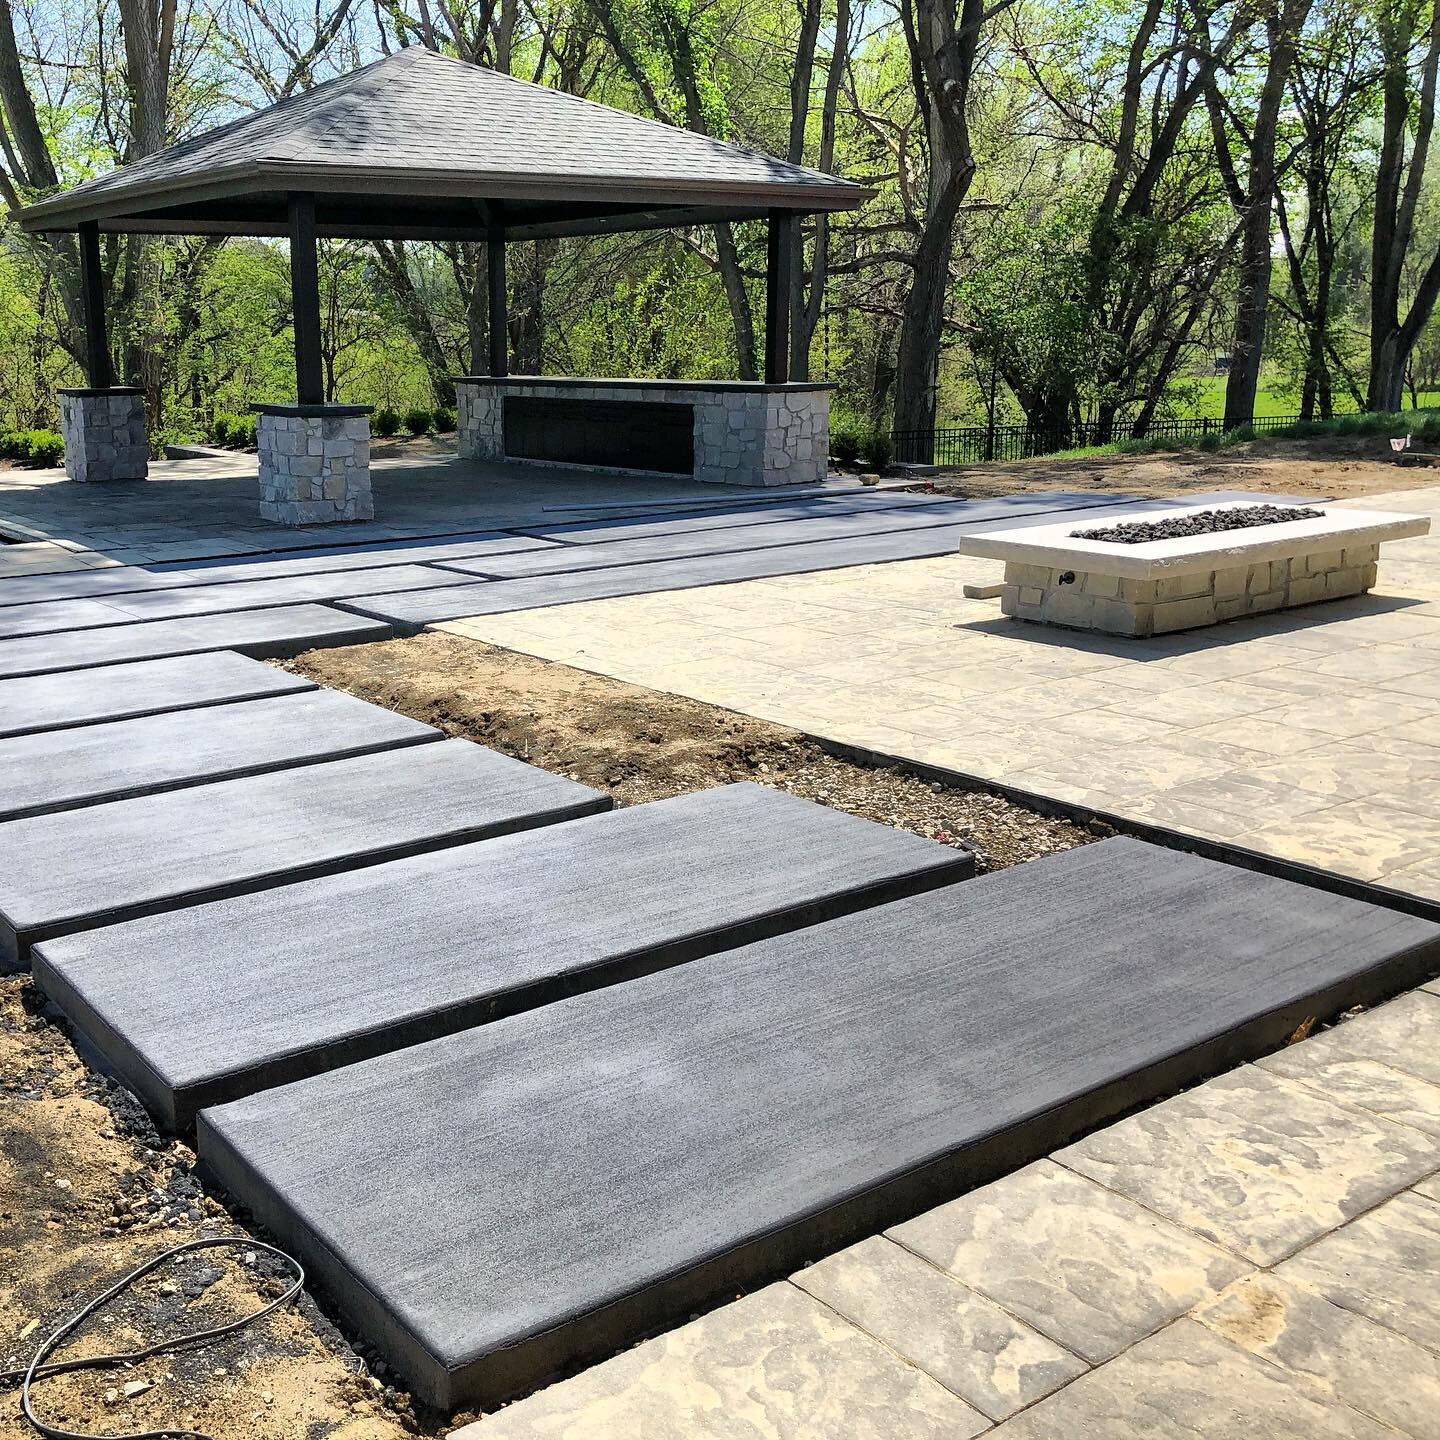 For this outdoor space, poured concrete slabs offer a unique journey linking paver patio and pool pavilion.  Next, the garden will be installed.  Often overlooked, the garden design is the most important element to a well designed outdoor space.  Pro